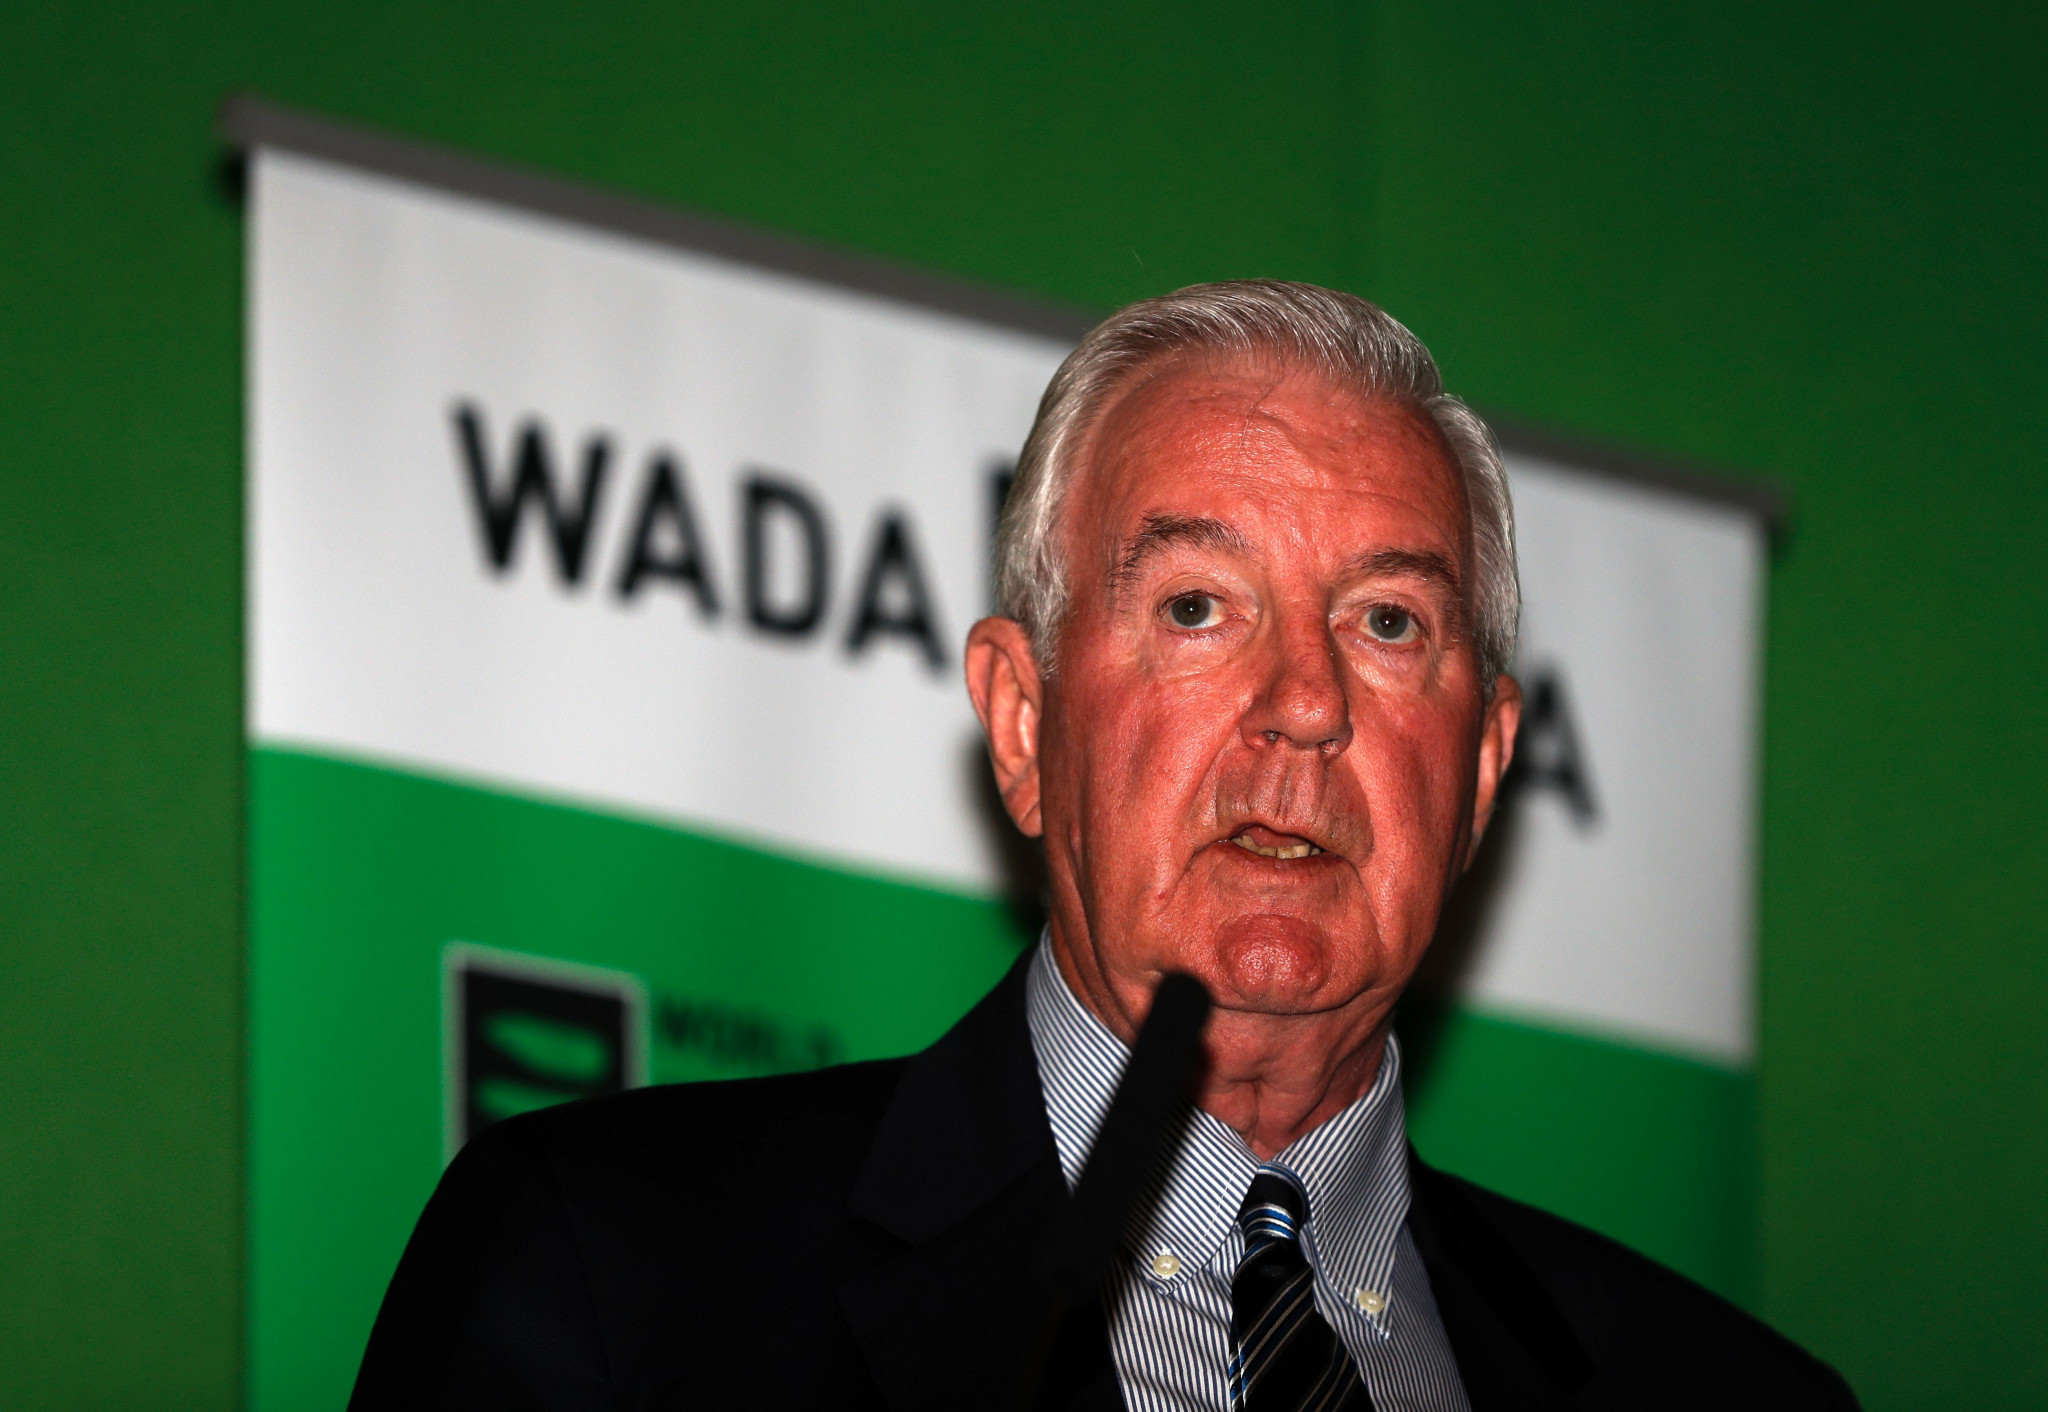 Sir Craig Reedie, President of WADA, says there are encouraging signs coming out of Russia ©Getty Images